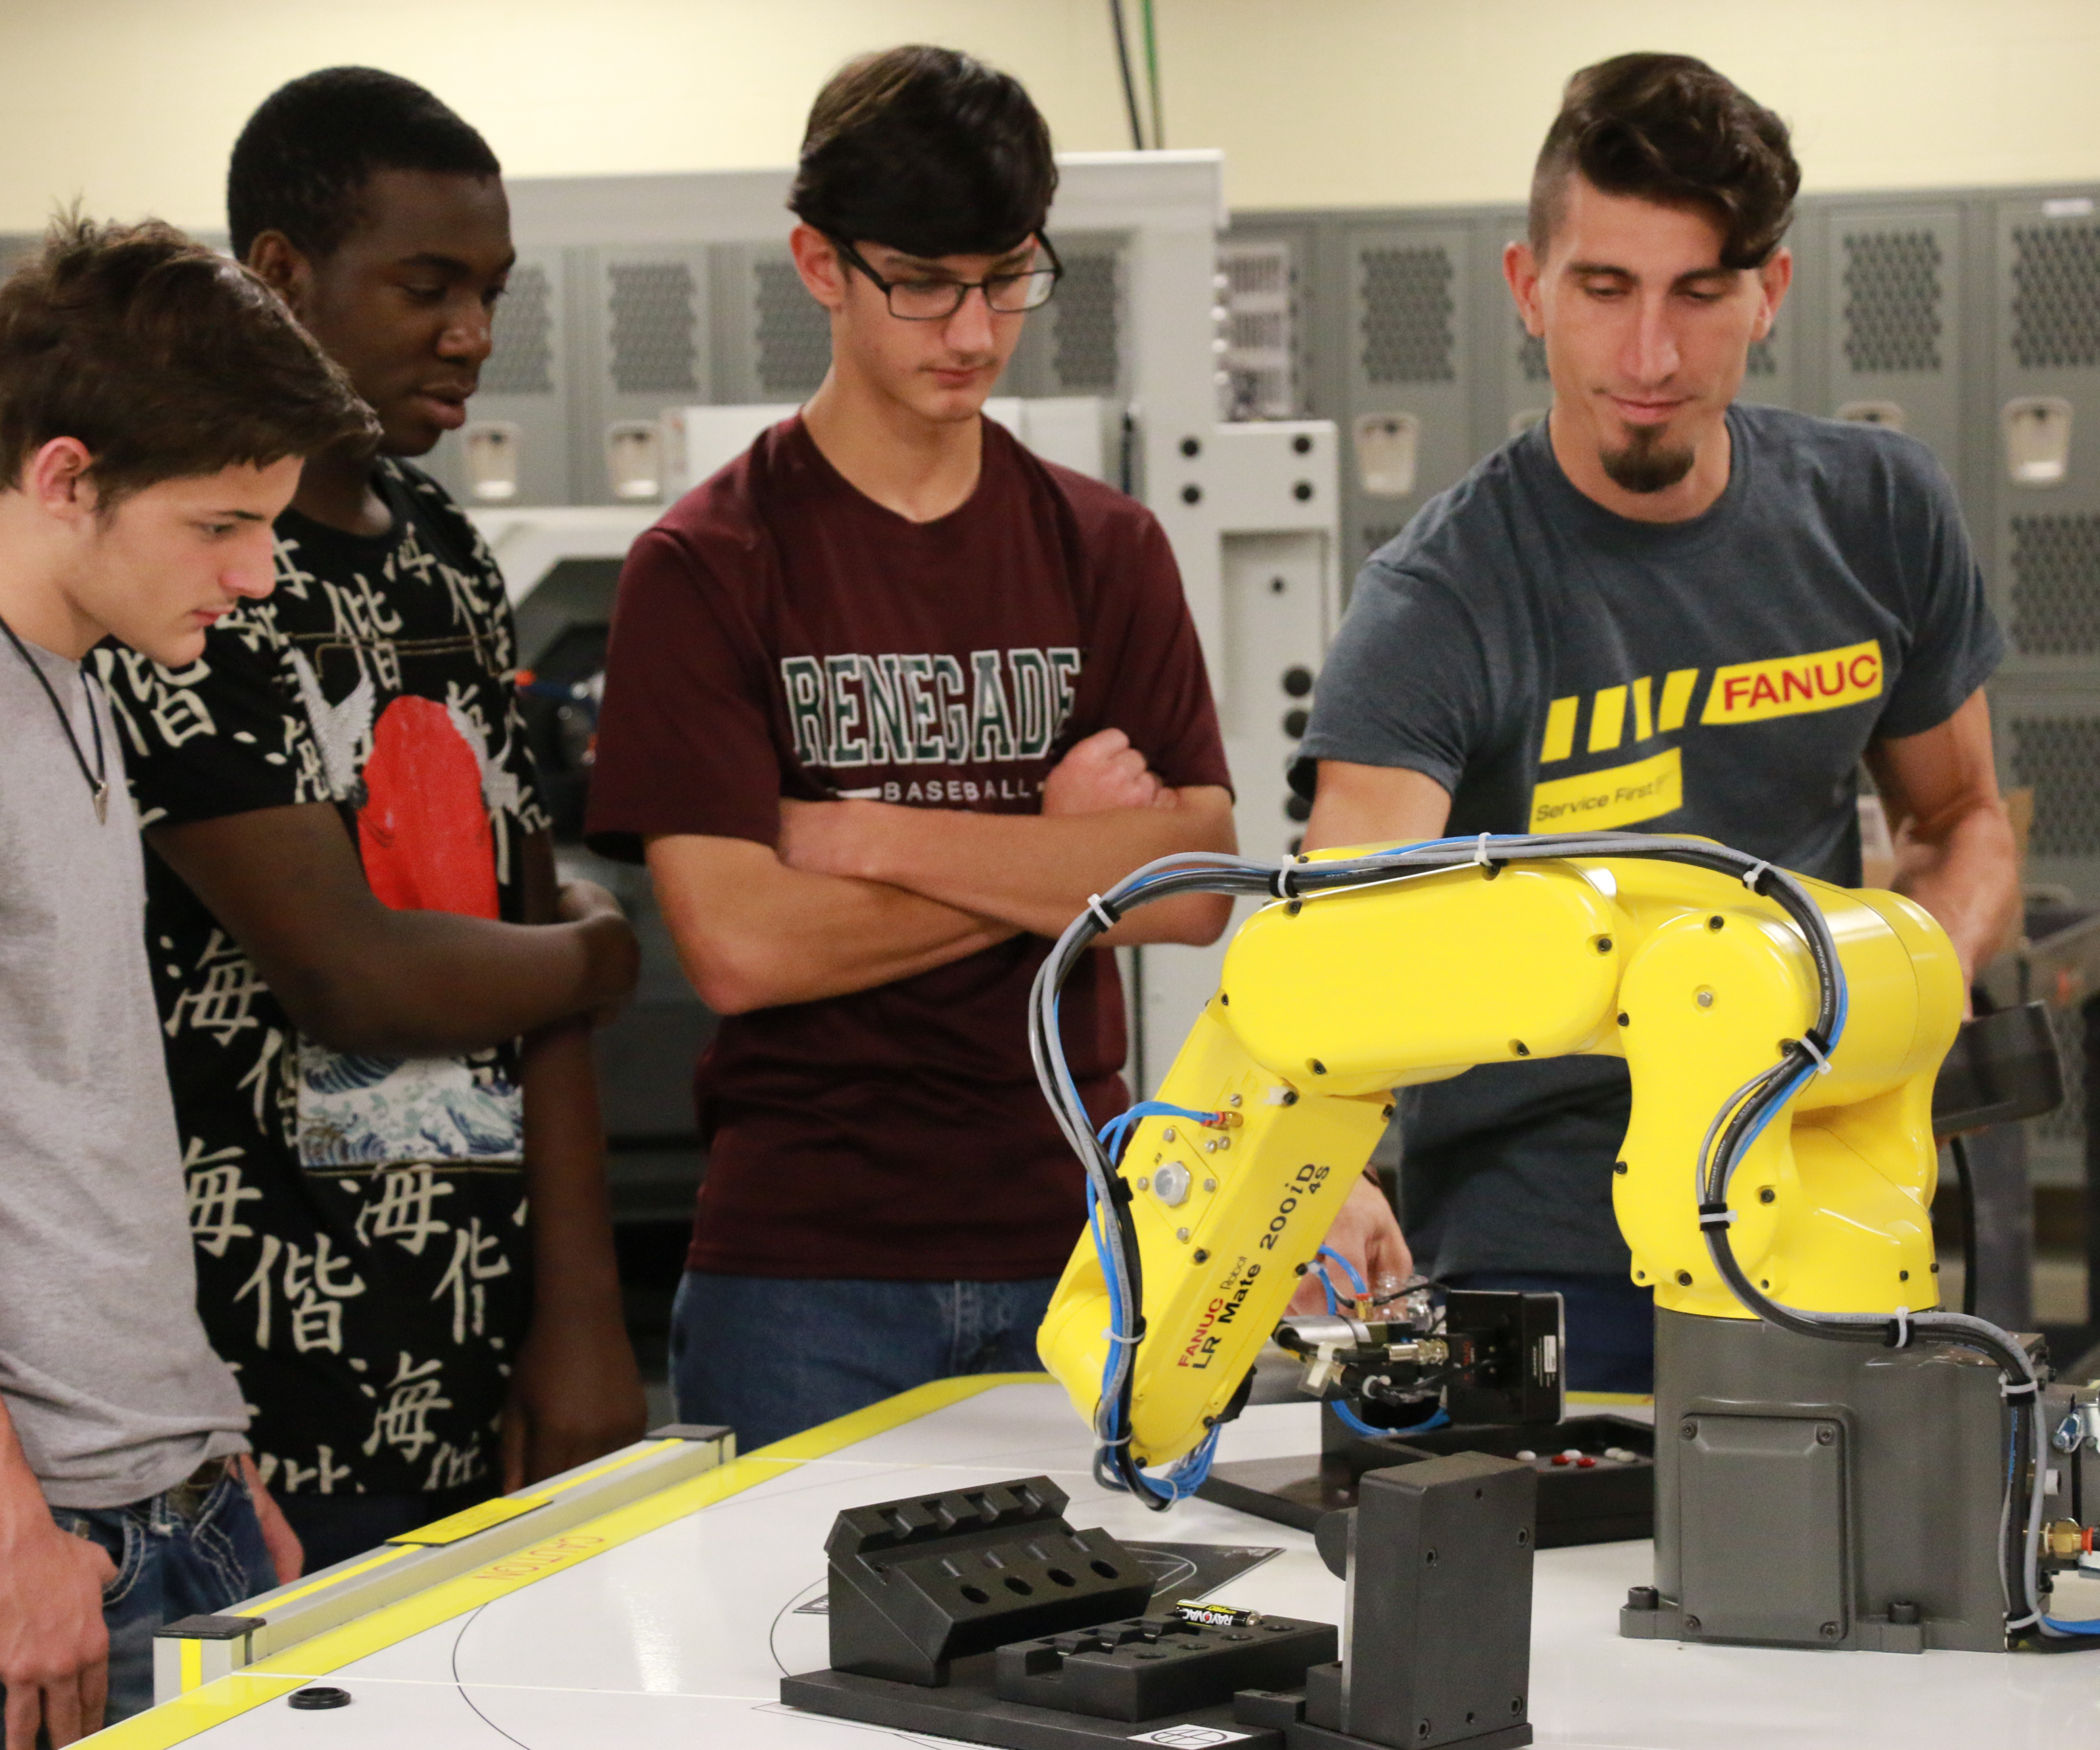 Students learning how to operate a piece of equipment